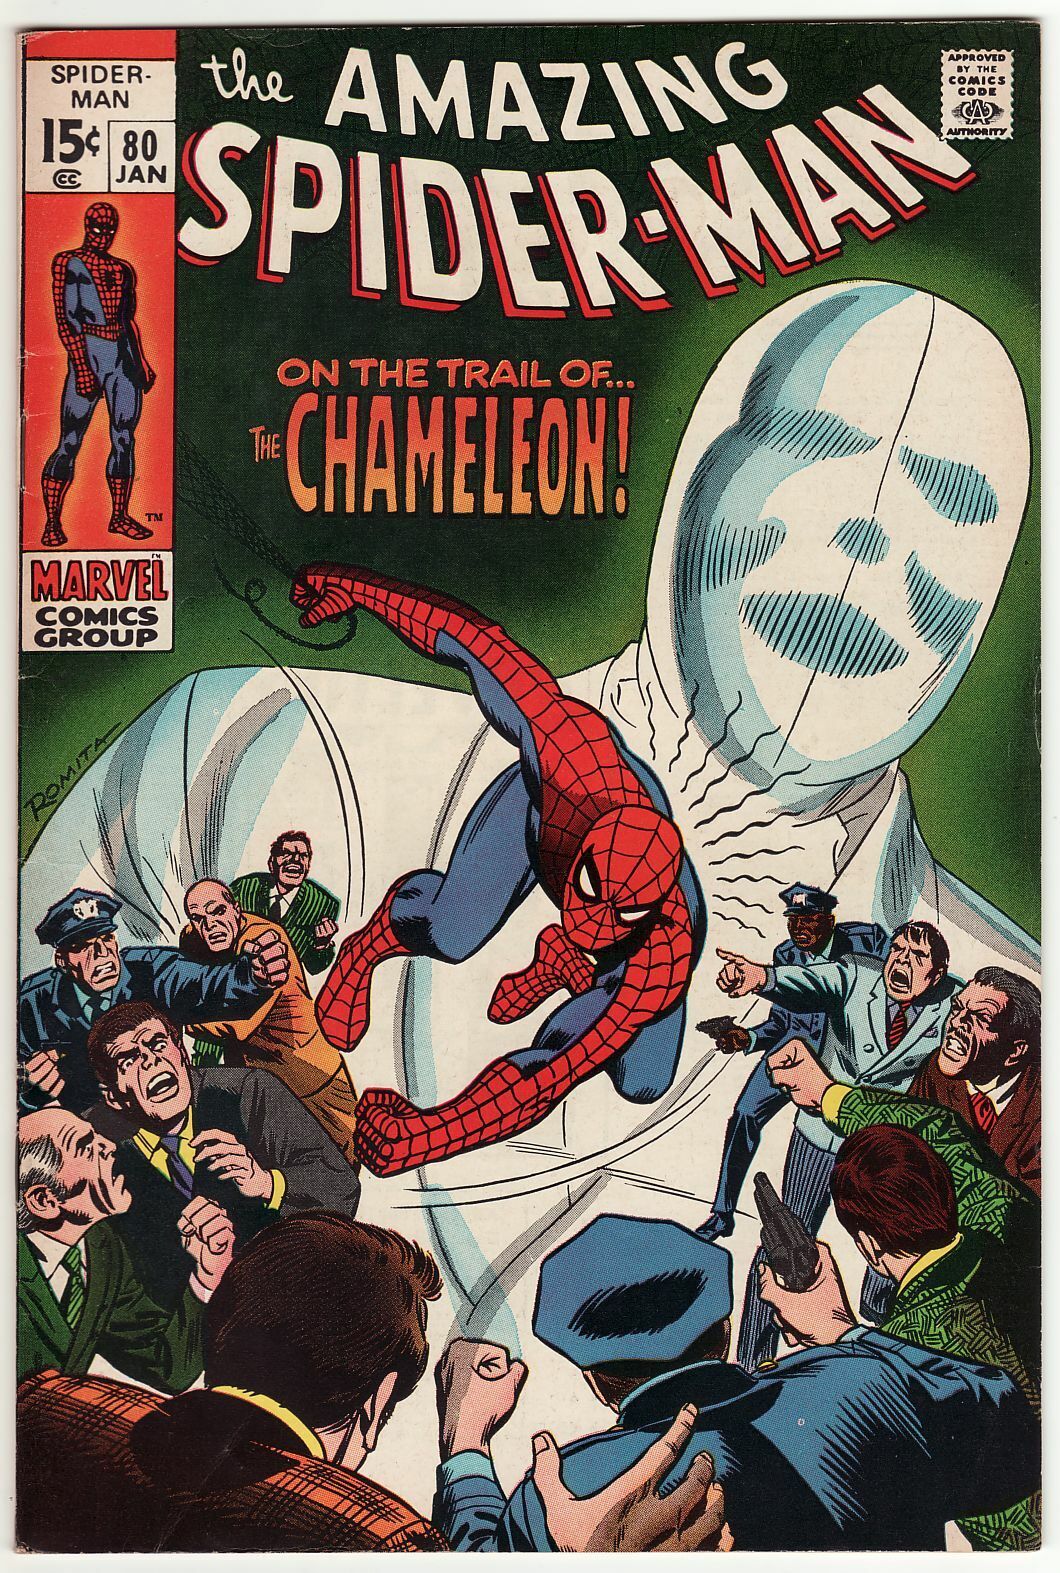 The Amazing Spider-Man #80 ~ On the Trail of... The Chameleon ~ 1970 Marvel